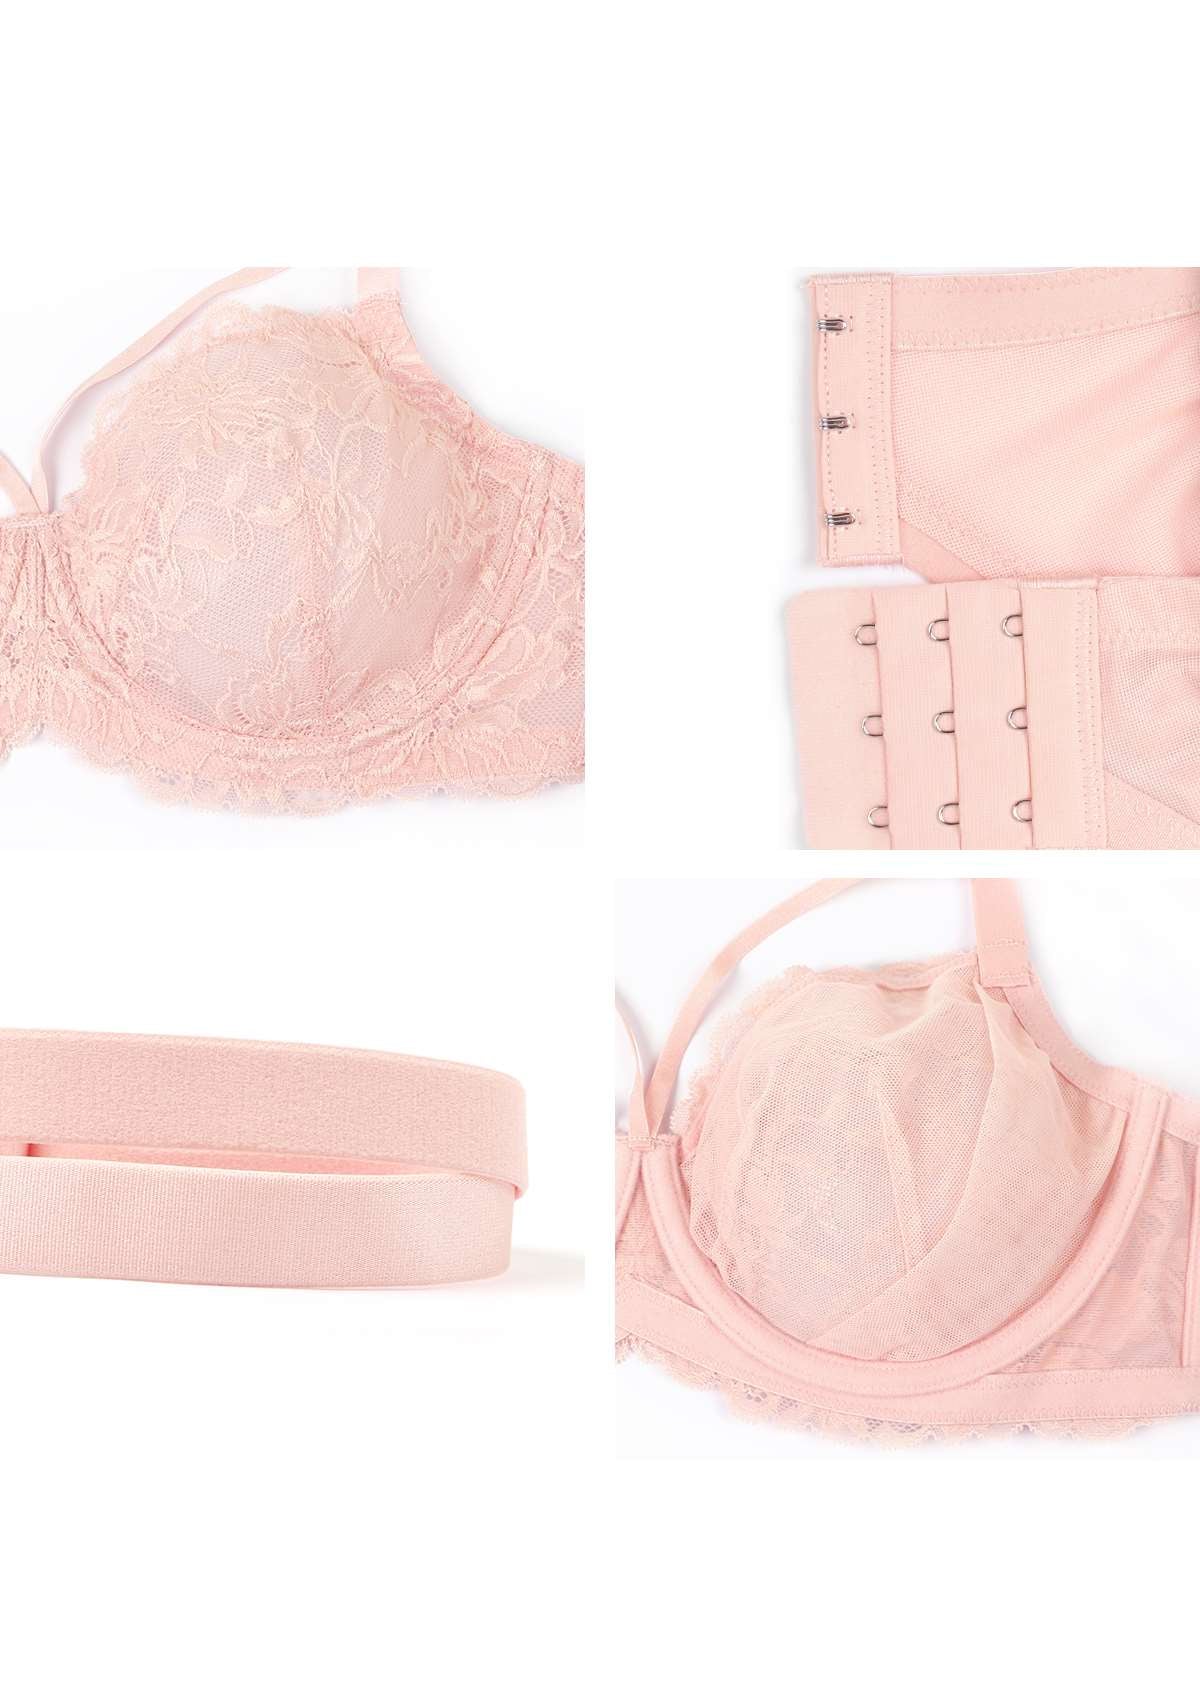 HSIA Pretty In Petals: Strappy Lace Sheer Bra For Side And Back Fat - Baby Pink / 40 / G